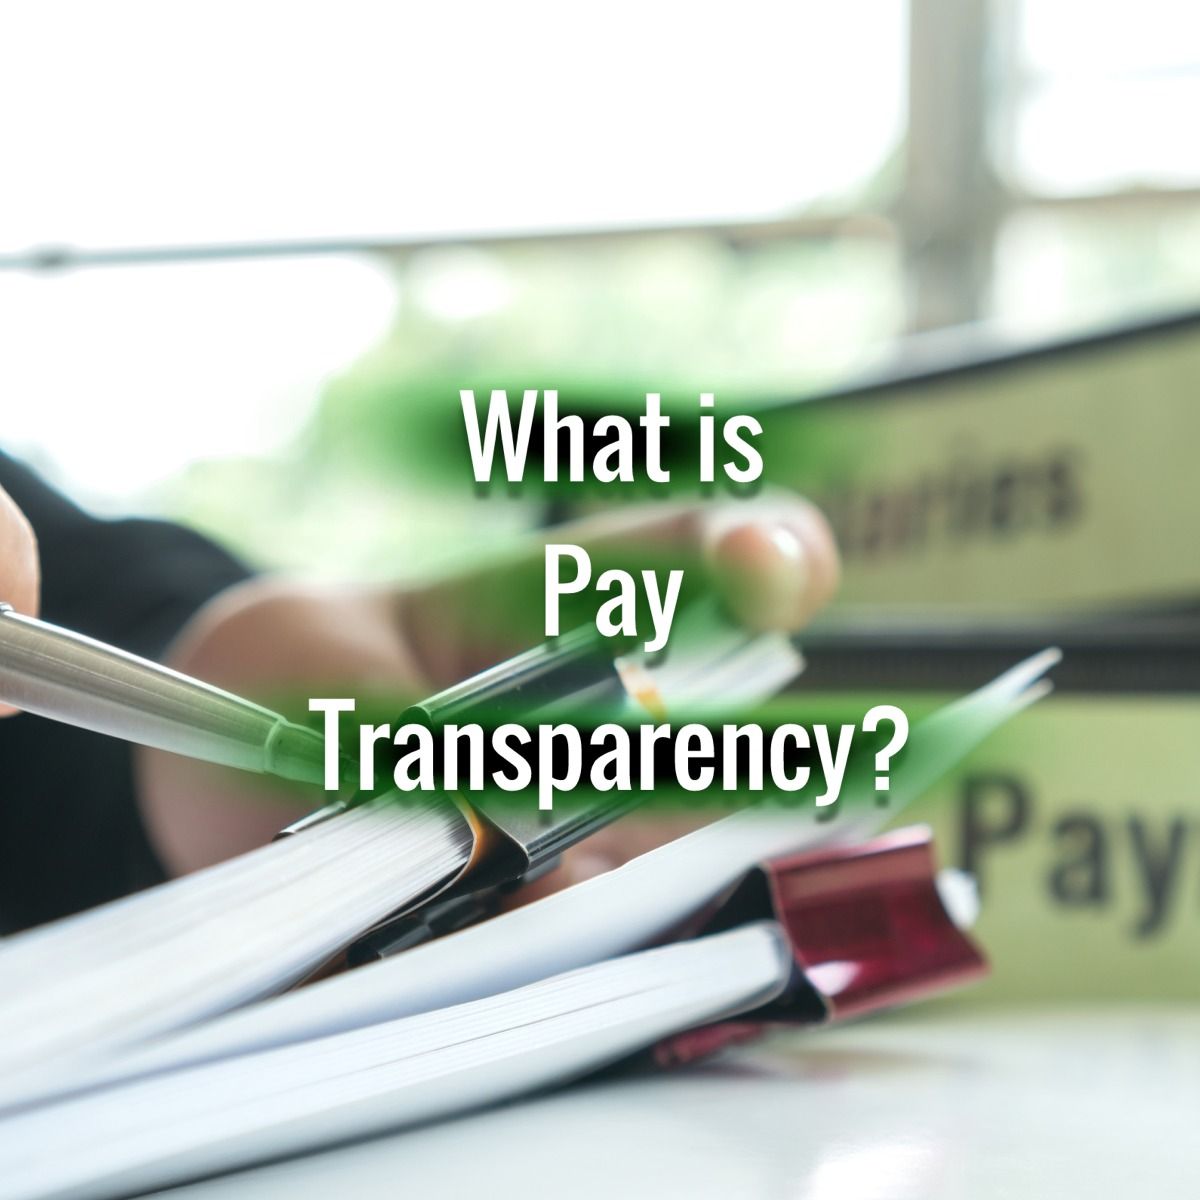 What is Pay Transparency?